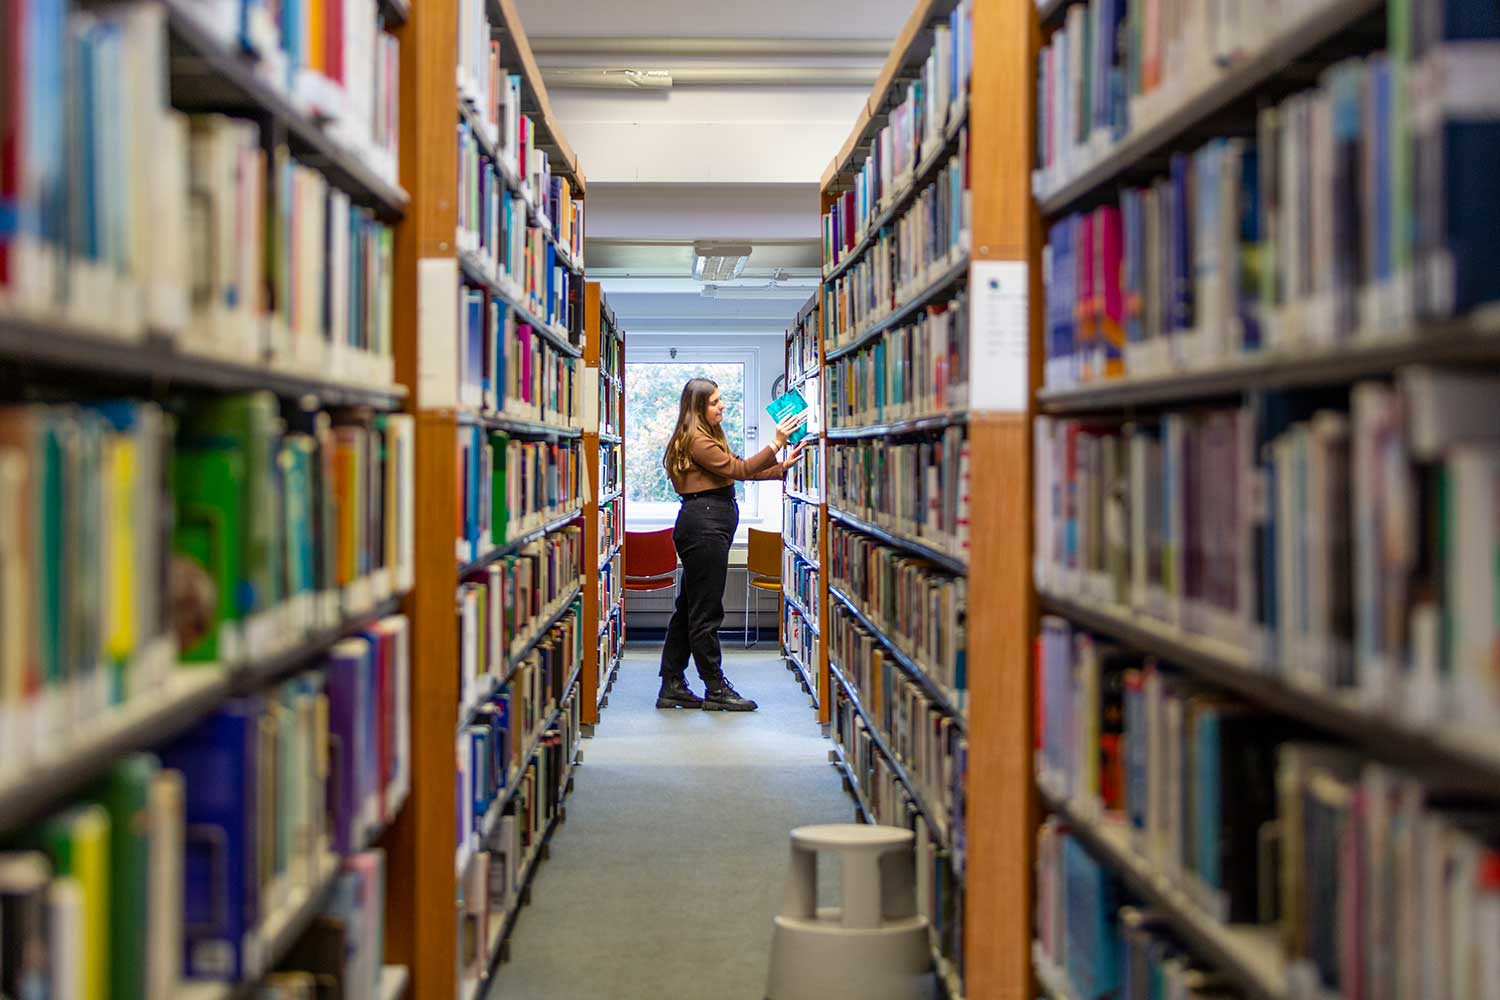 A woman stands between two high rows of library shelves browsing the books on the shelf in front of her